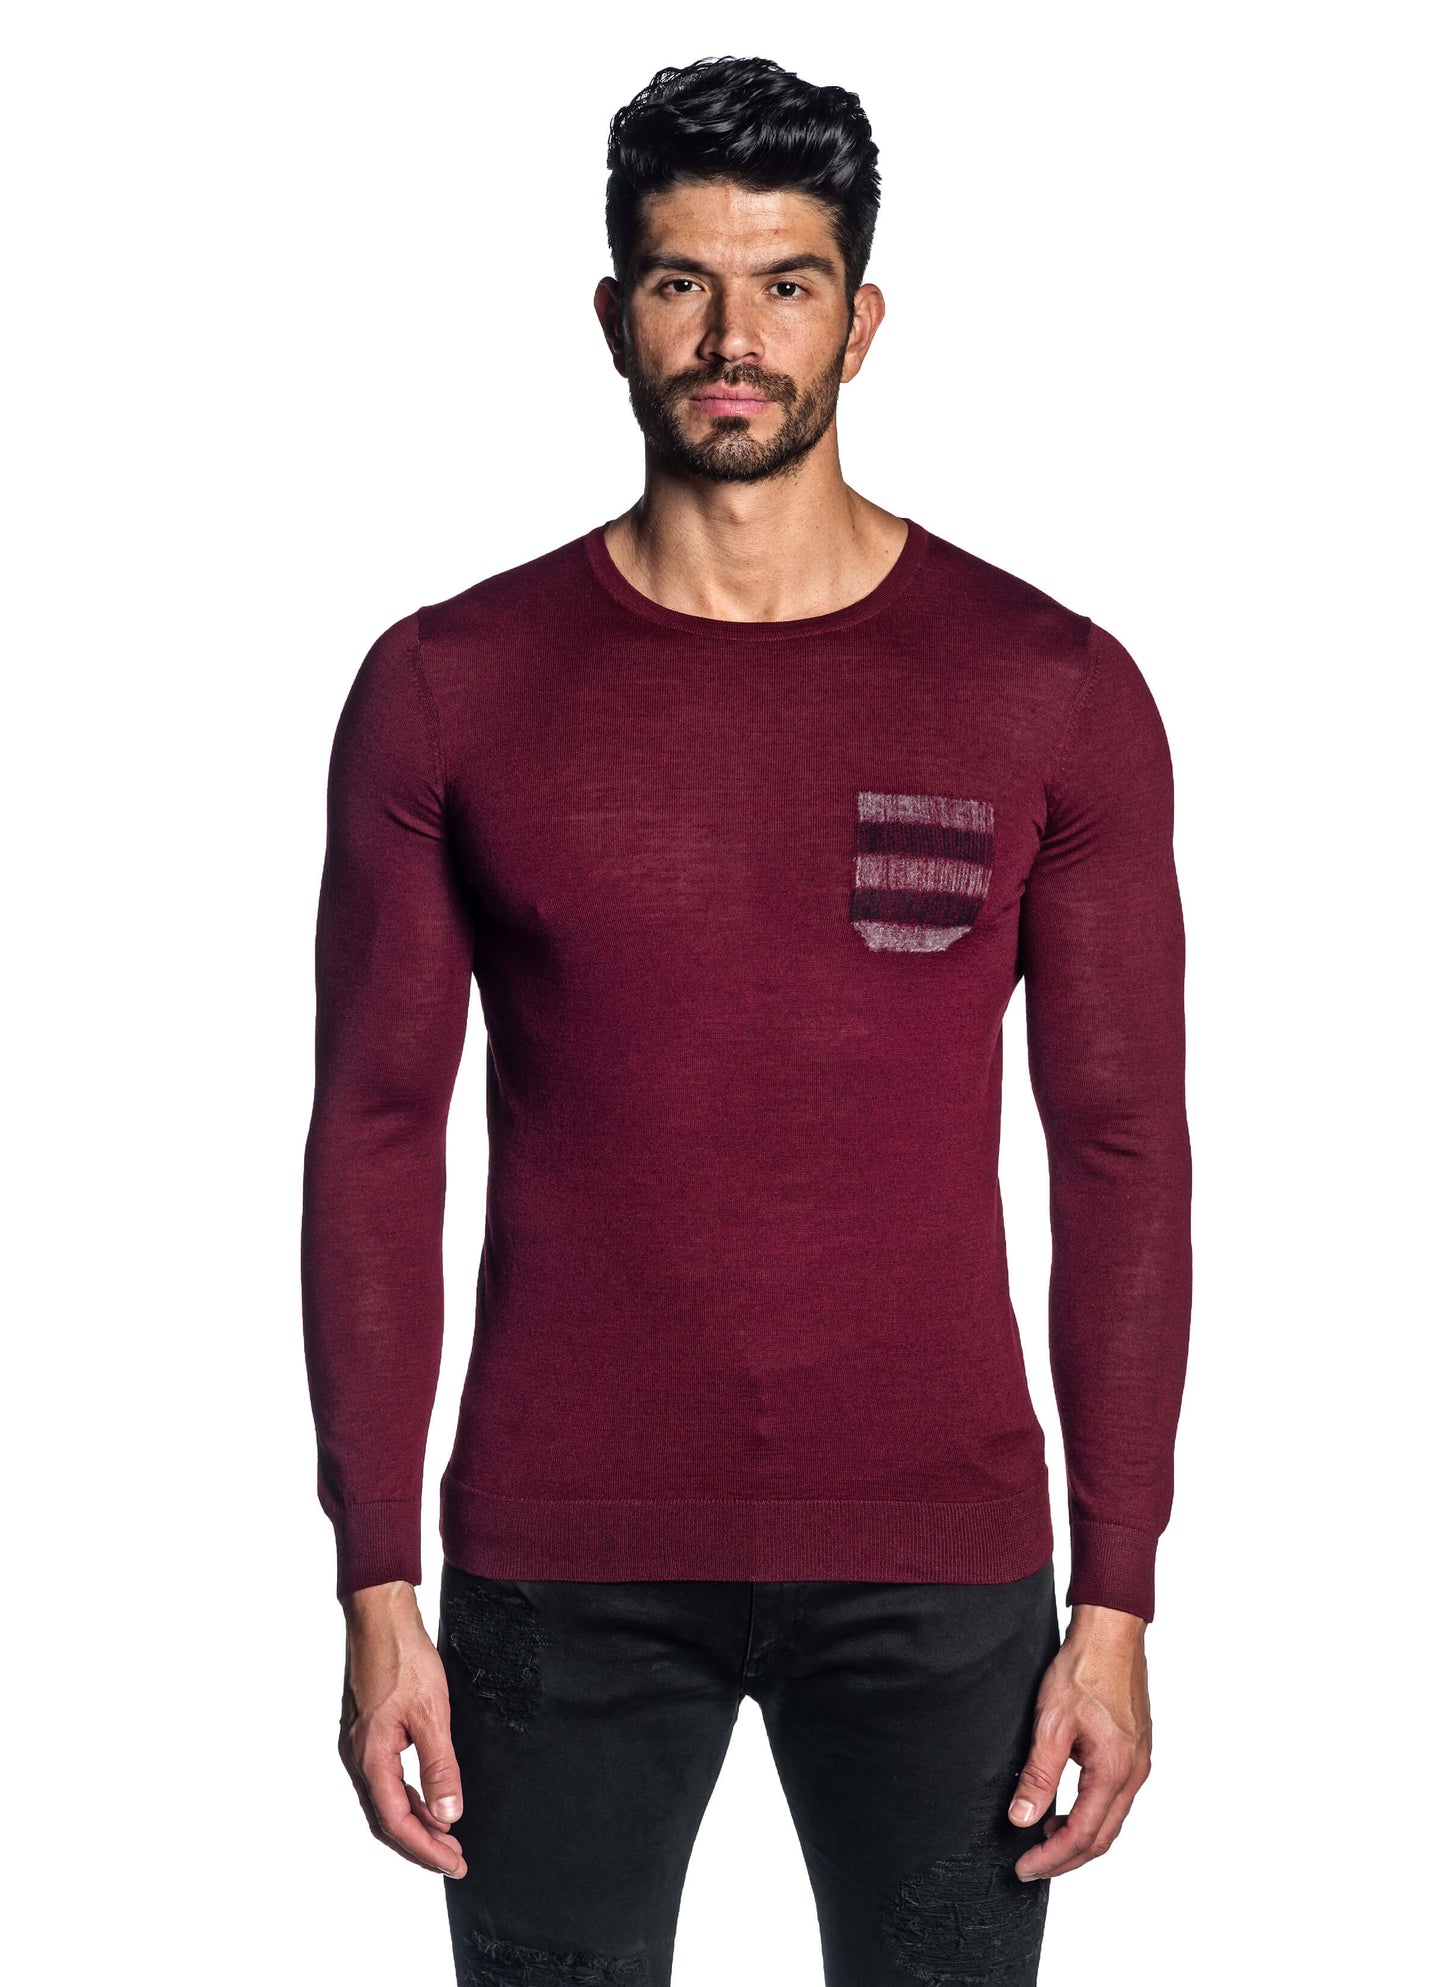 Red Crew Neck Sweater for Men H-02682-06 - Front - Jared Lang